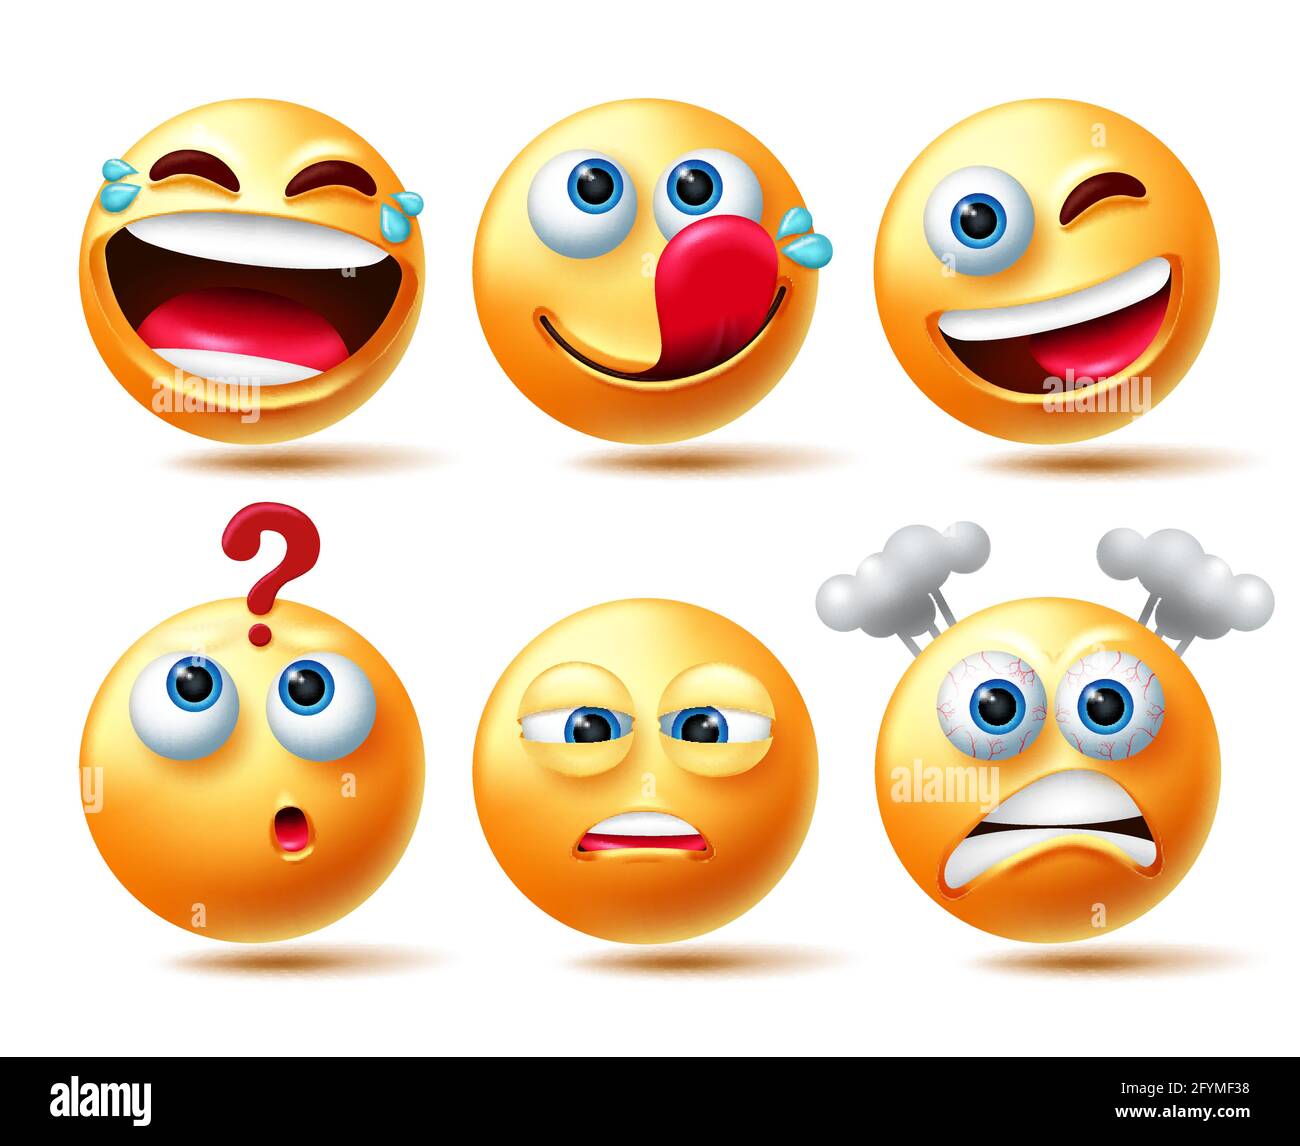 Smileys emoticon vector set. Emoticons 3d smiley characters in laughing, thinking and yummy expressions for emoticons character emotion collection. Stock Vector